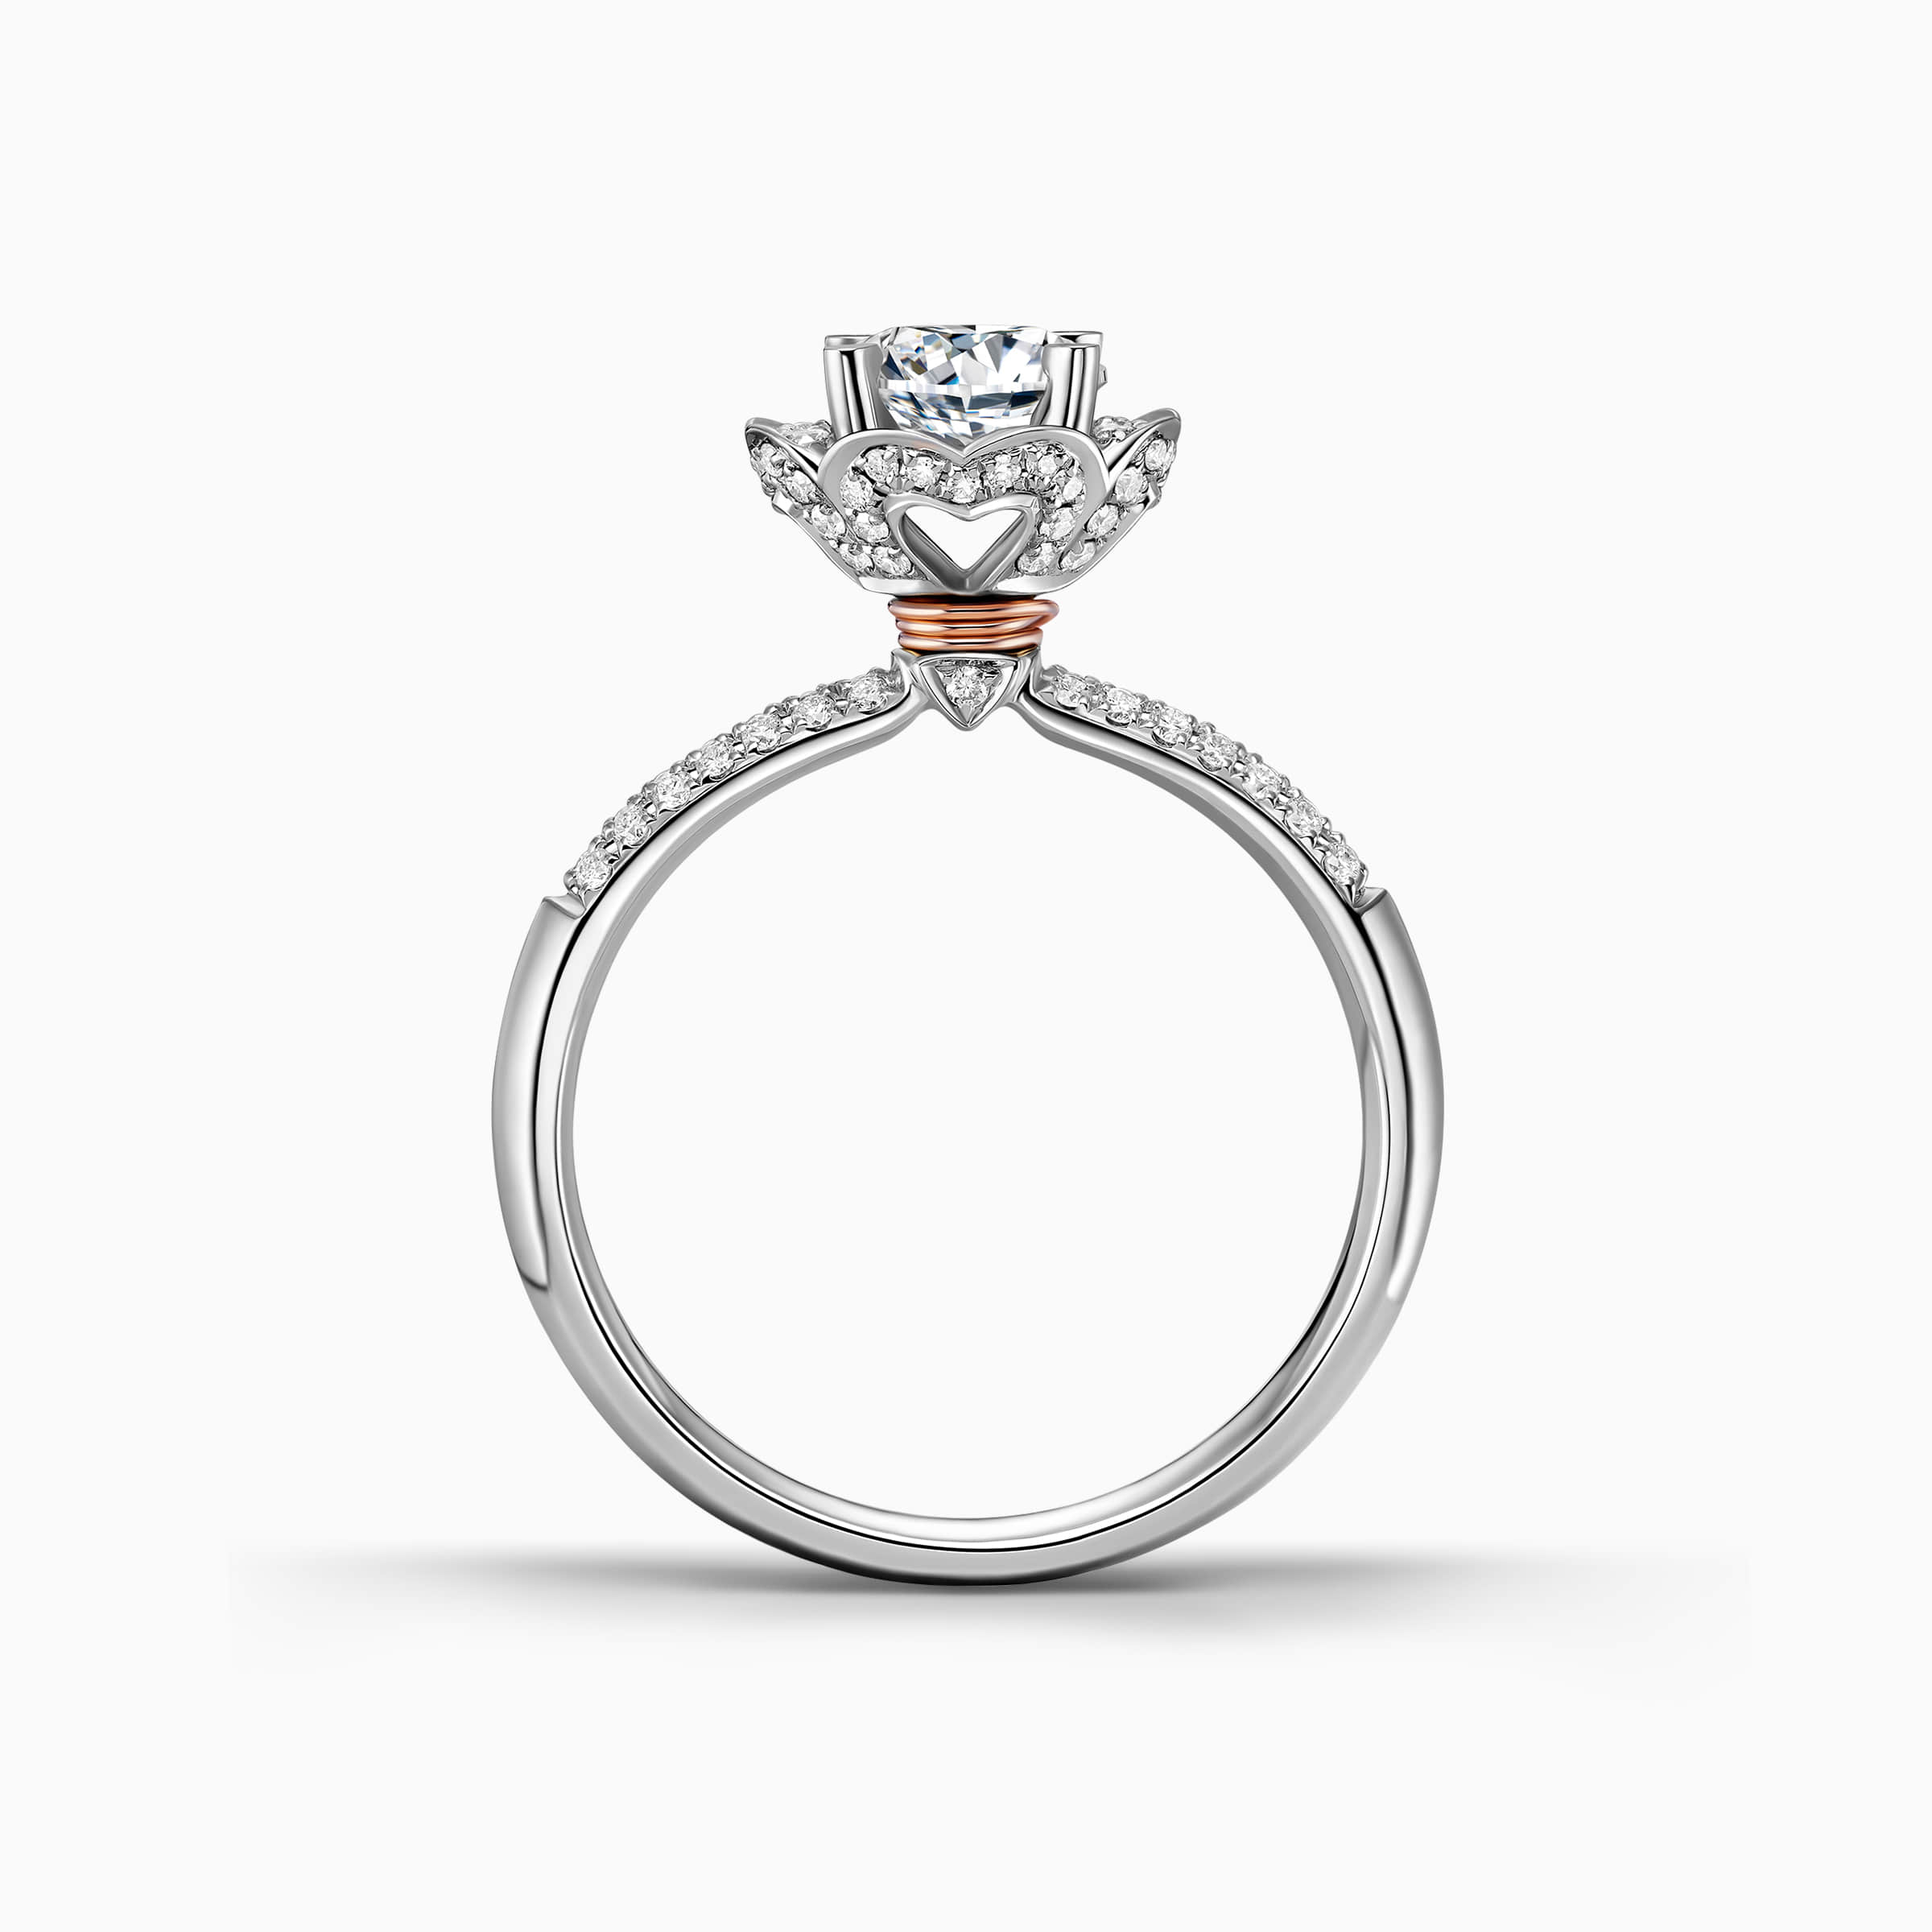 Darry Ring designer engagement ring front view